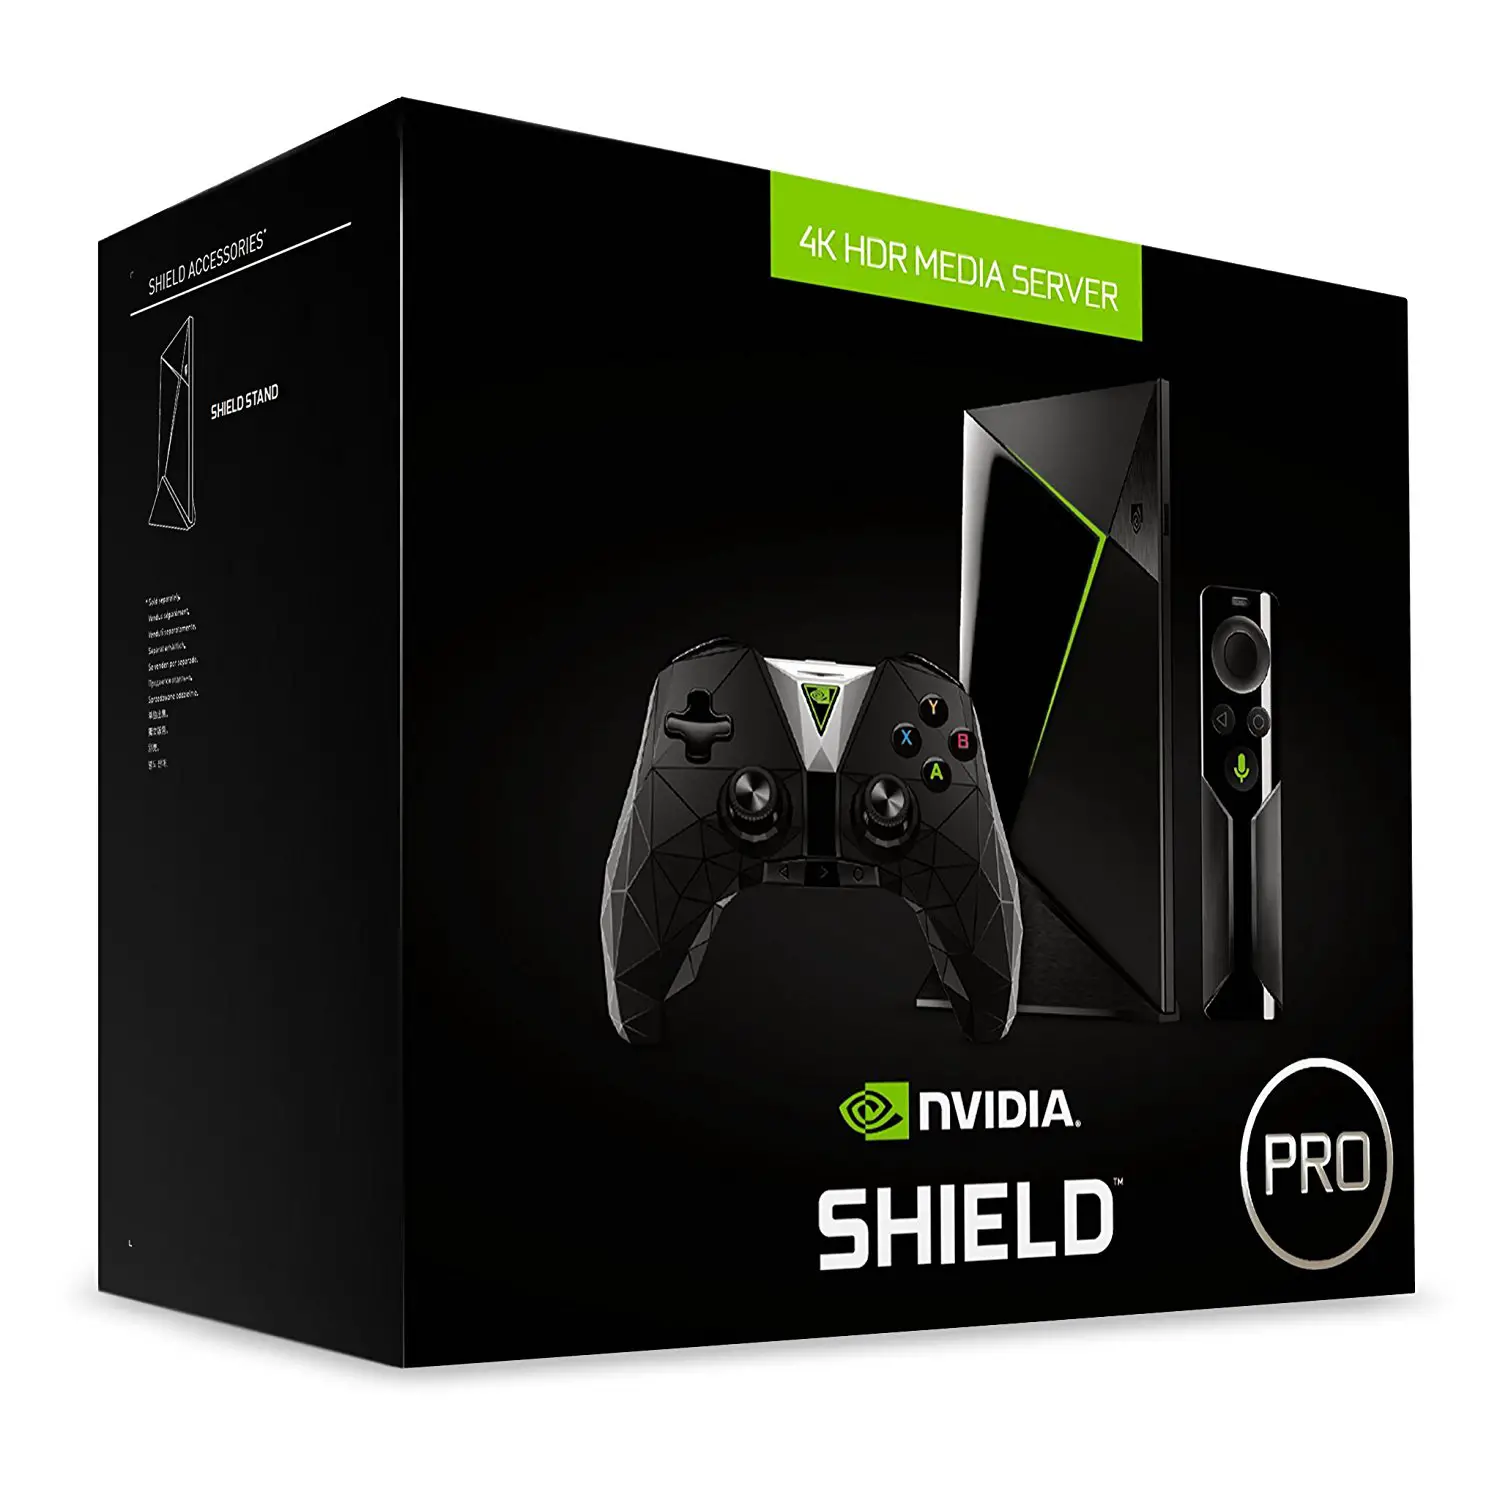 PSA You can now buy the 2017 NVIDIA SHIELD Pro Phandroid